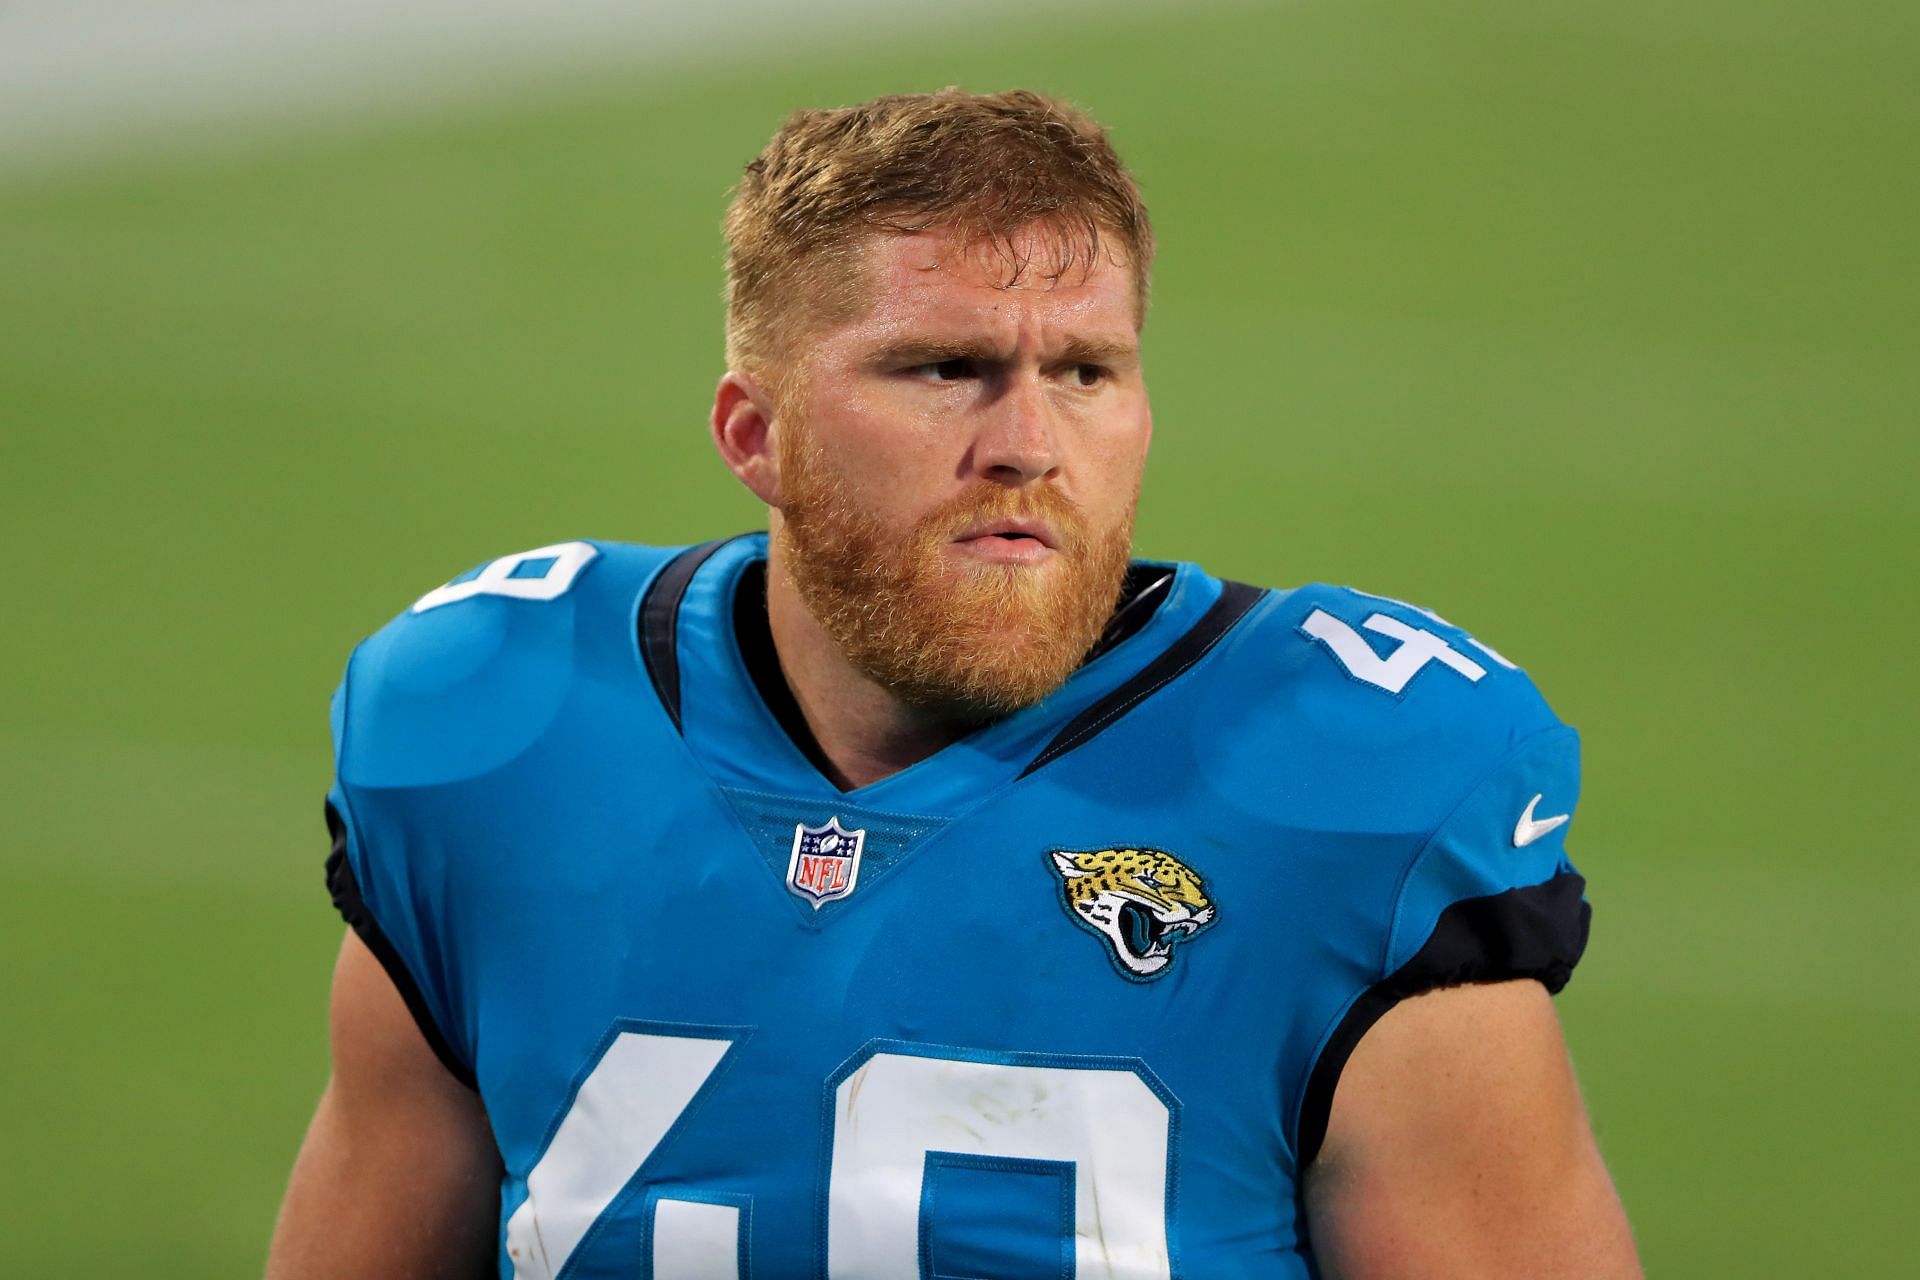 Bruce Miller threatened to execute Eric Swalwell